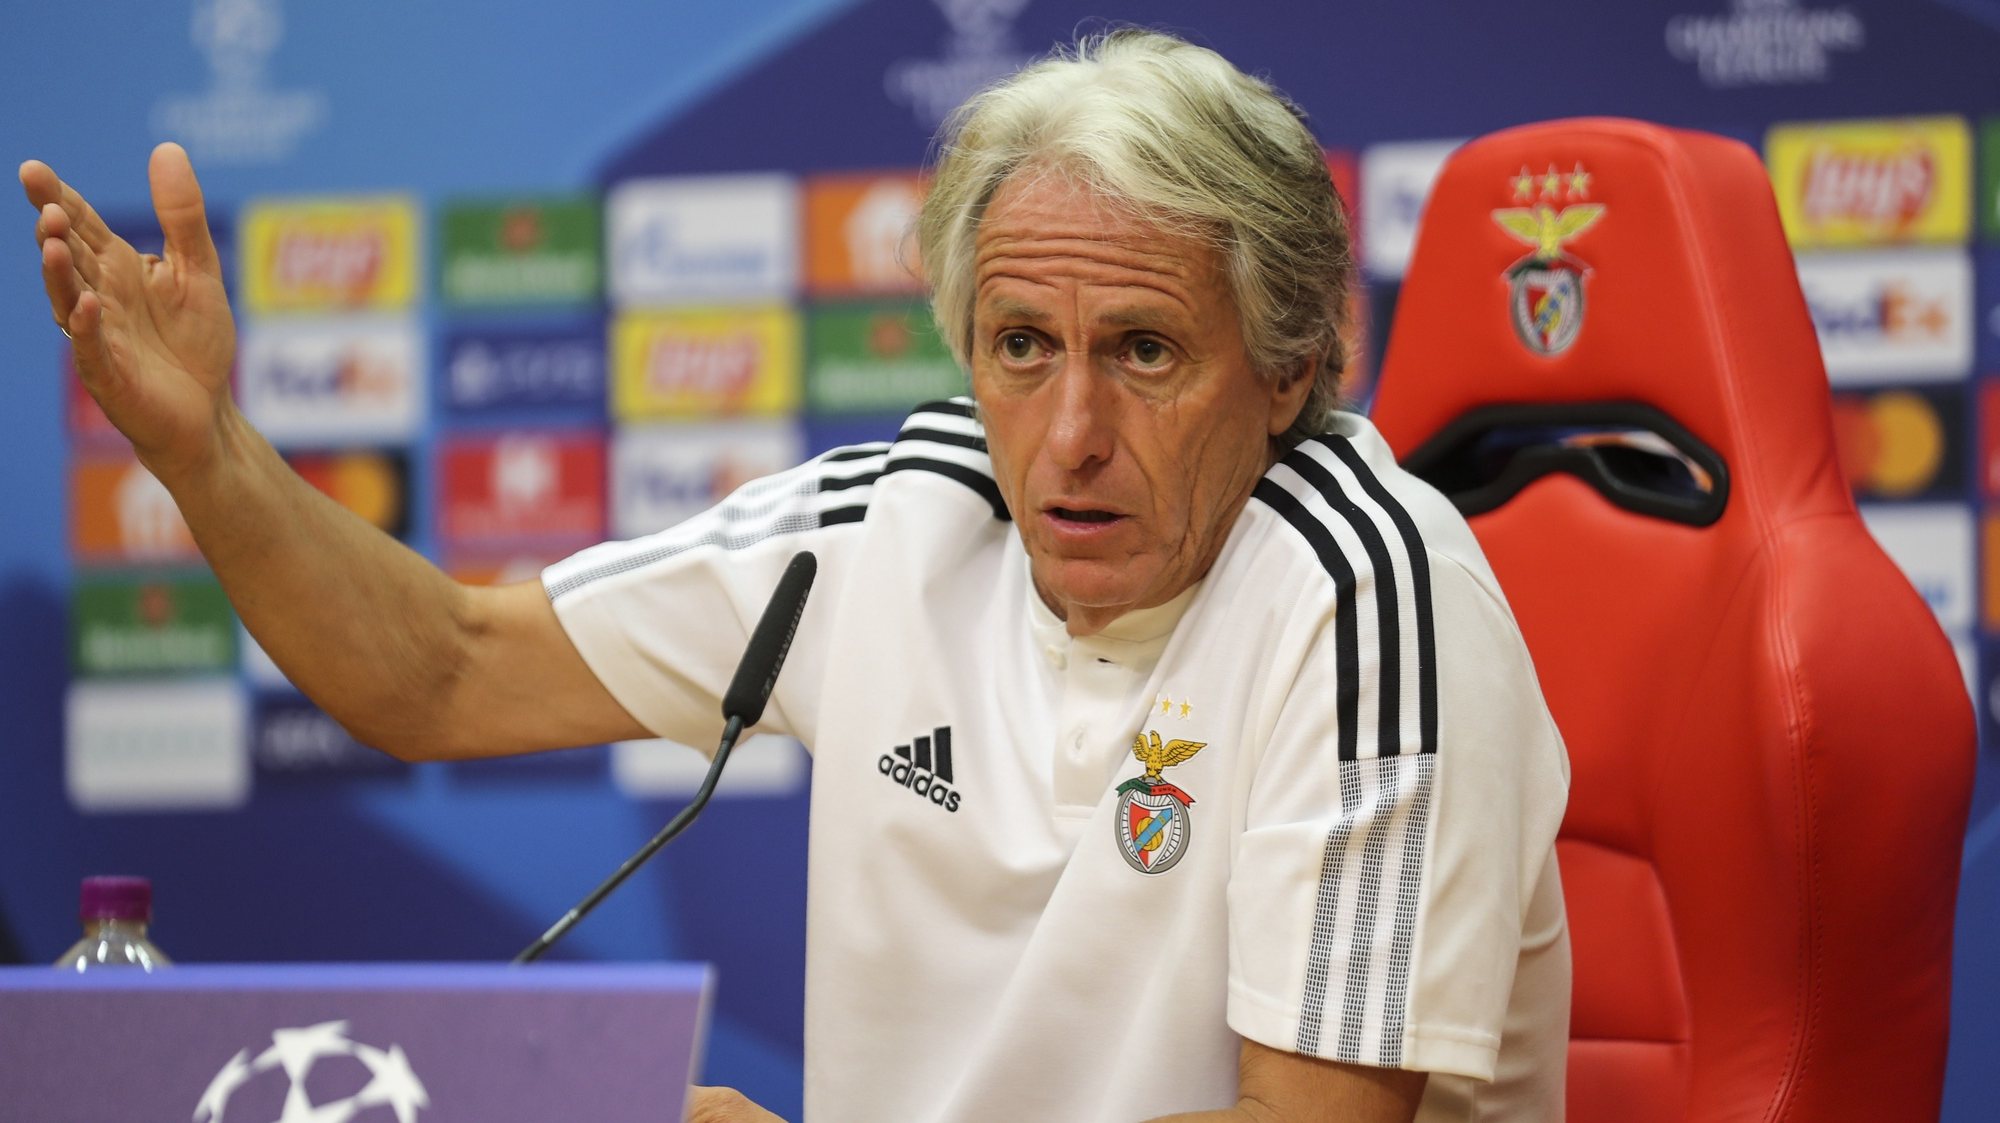 Benfica&#039;s head coach Jorge Jesus during the press conference at Benfica&#039;s training camp in Seixal prior to tomorrows Champion League group E soccer match against Dinamo Kyiv, Seixal, Portugal, 13 of September 2021.  MIGUEL A. LOPES/LUSA